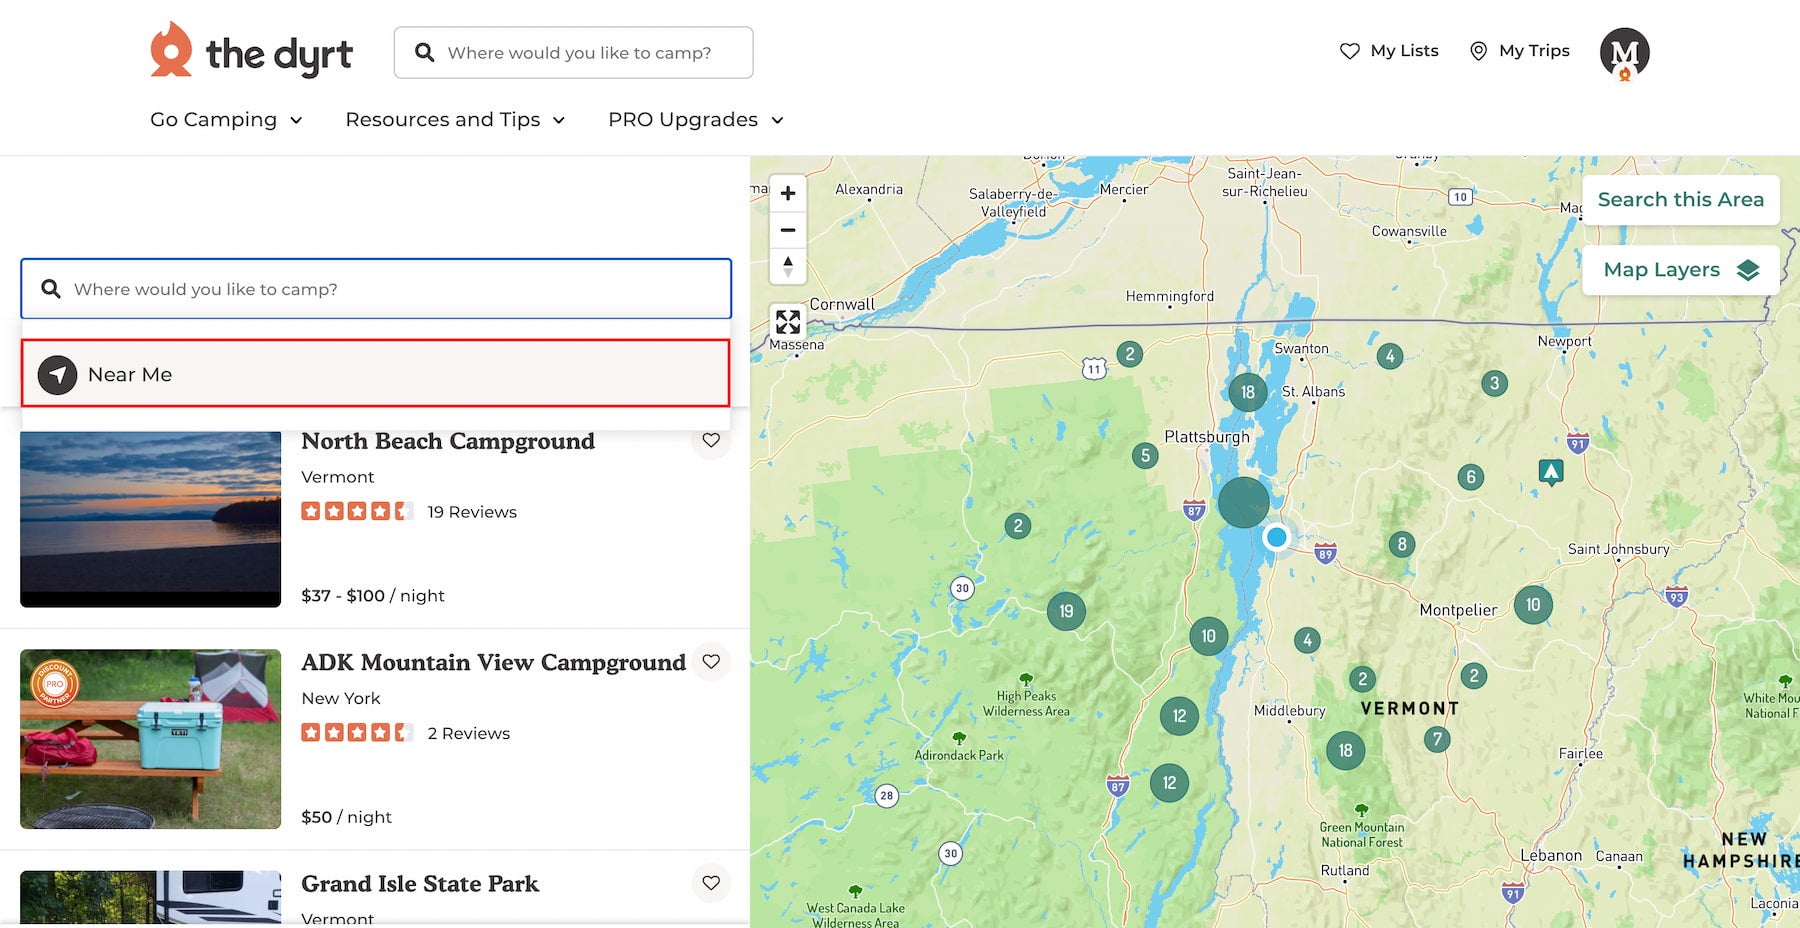 Near me function on The Dyrt camping search to find local campsites for fall camping with kids.